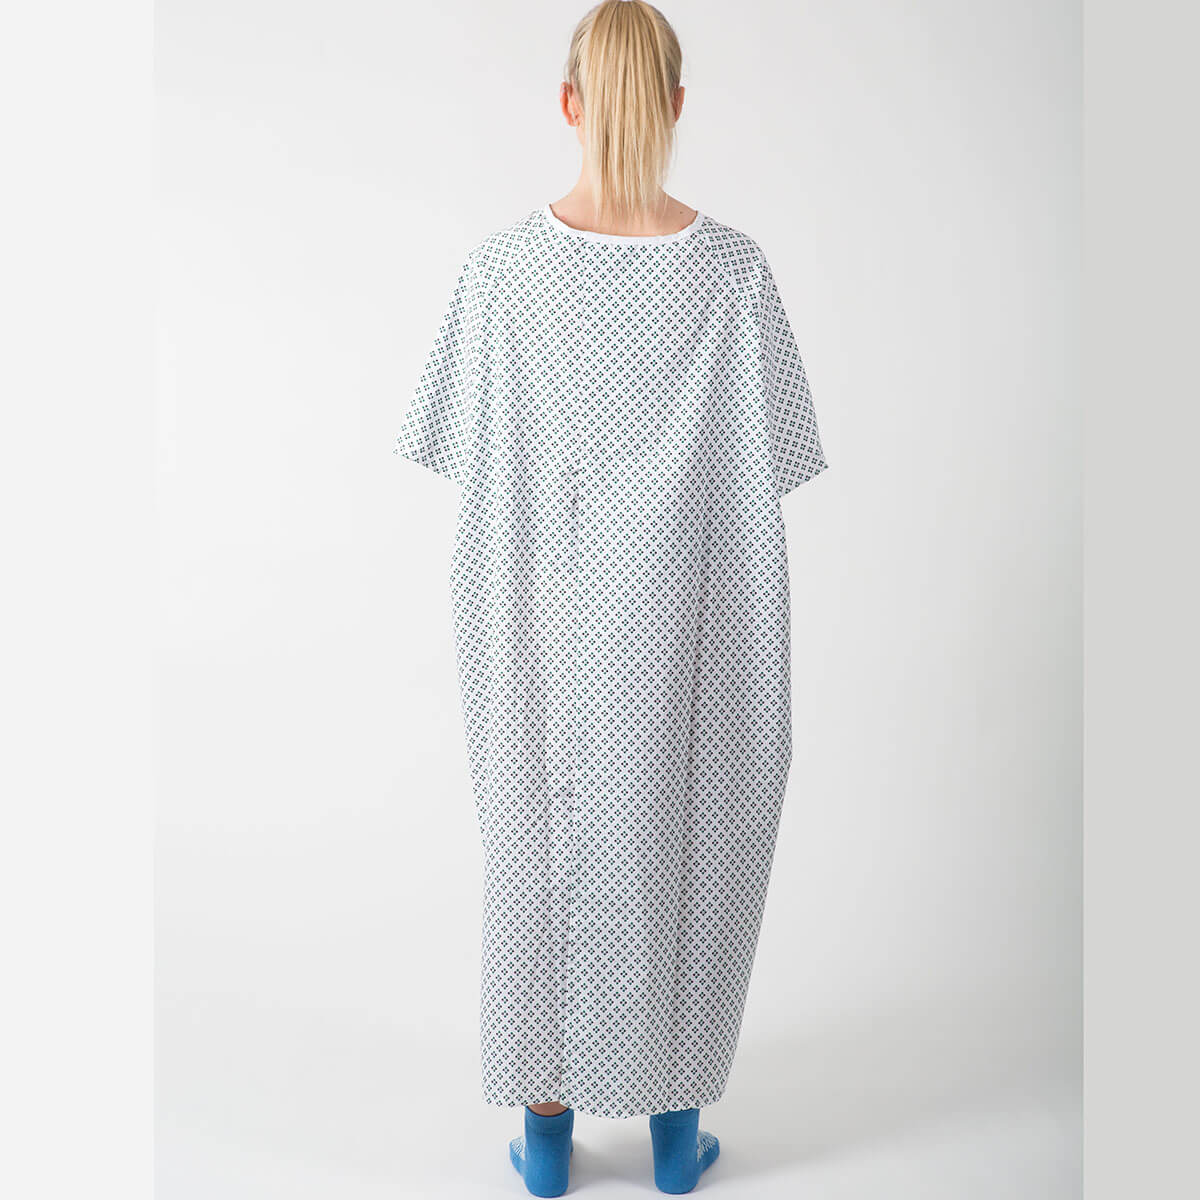 Hospital pullover gown - rear view